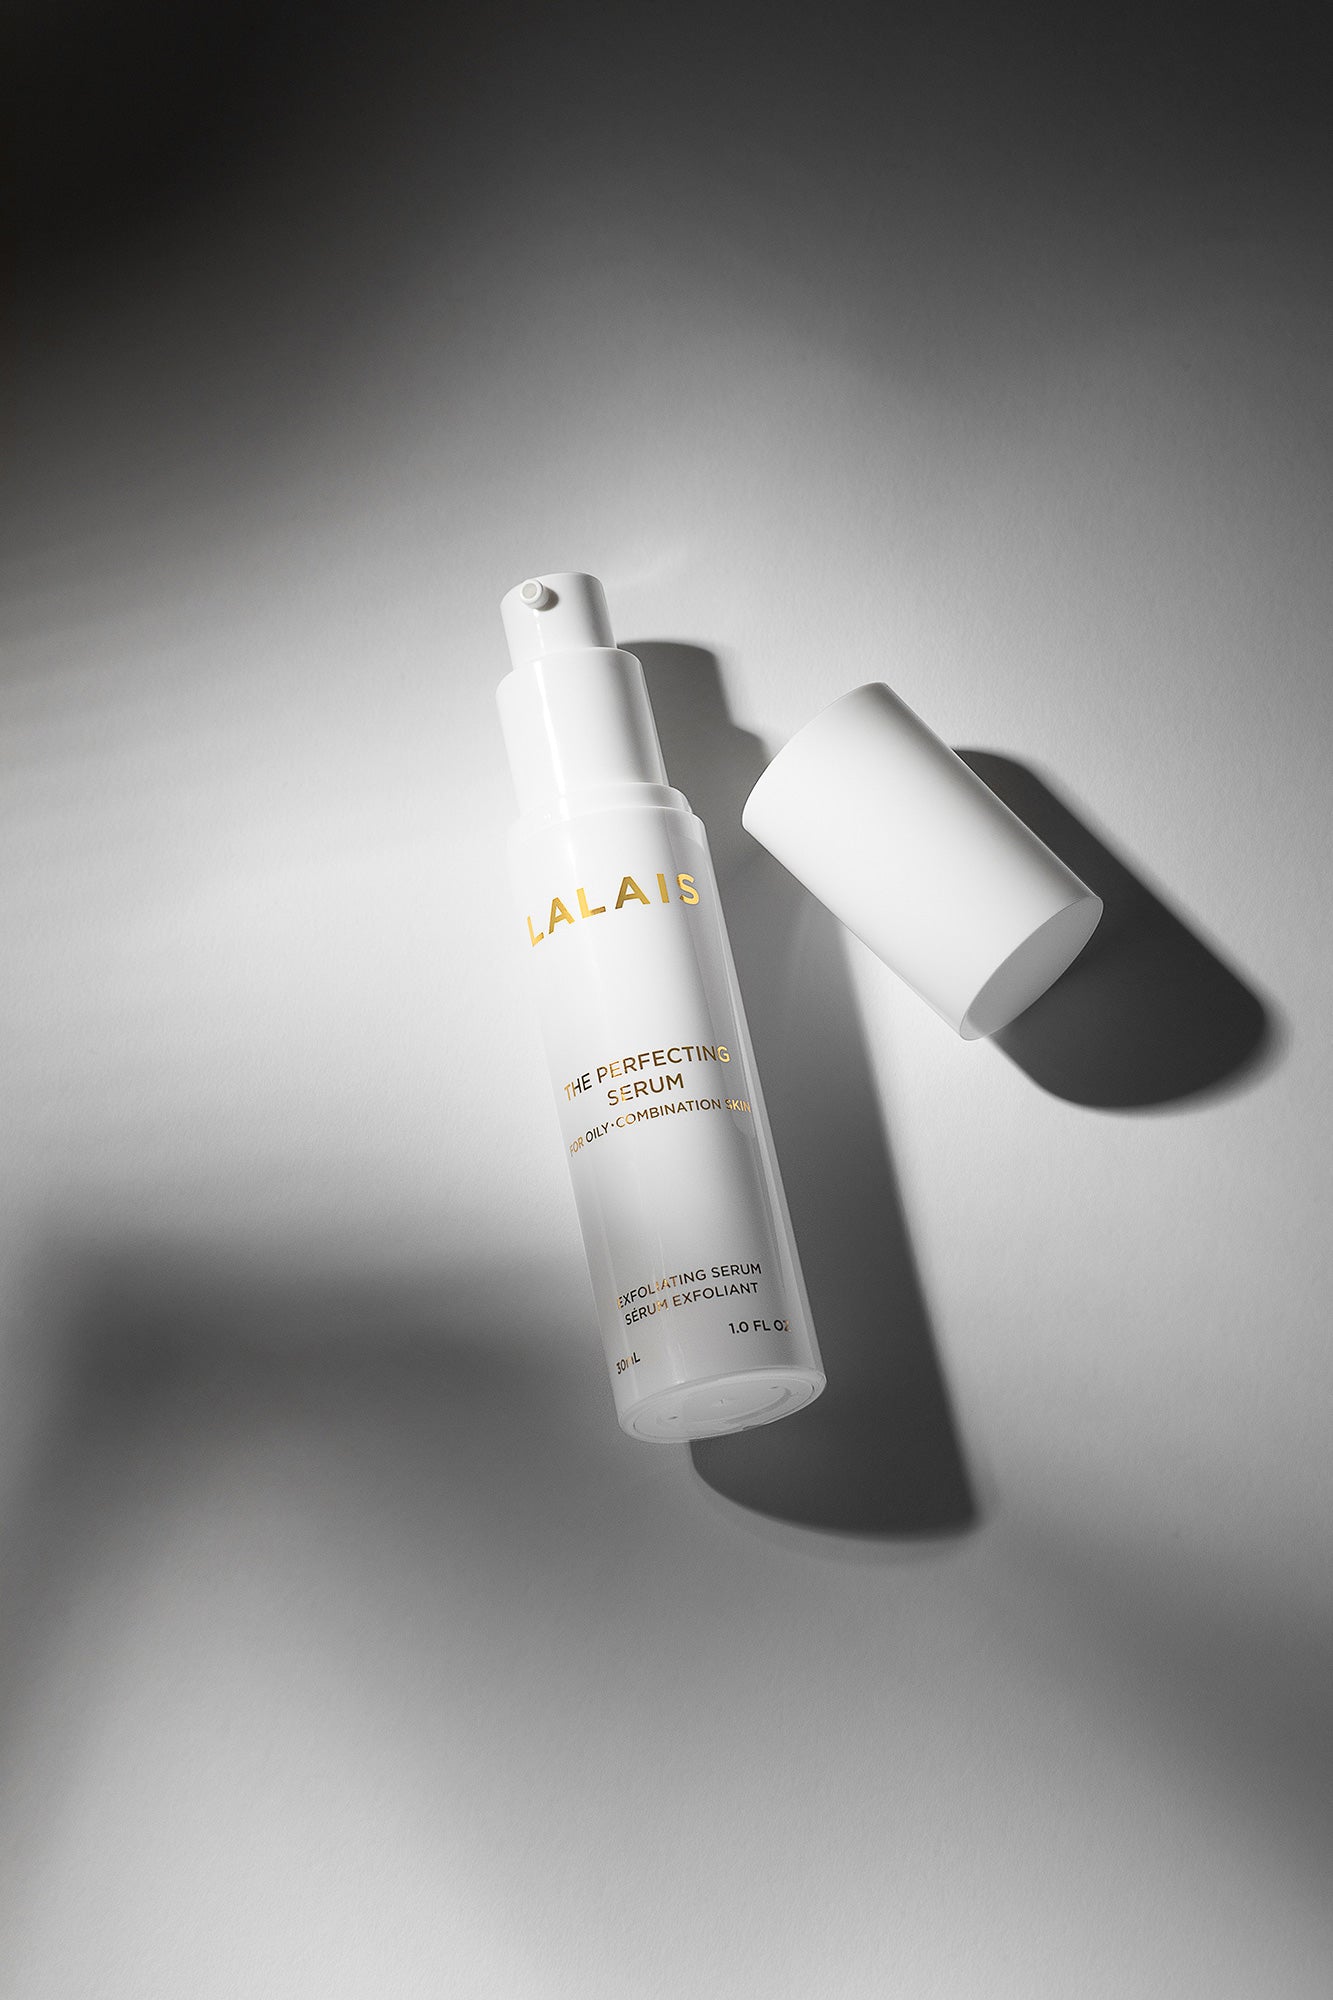 Lalais perfecting serum product shown on a gray background